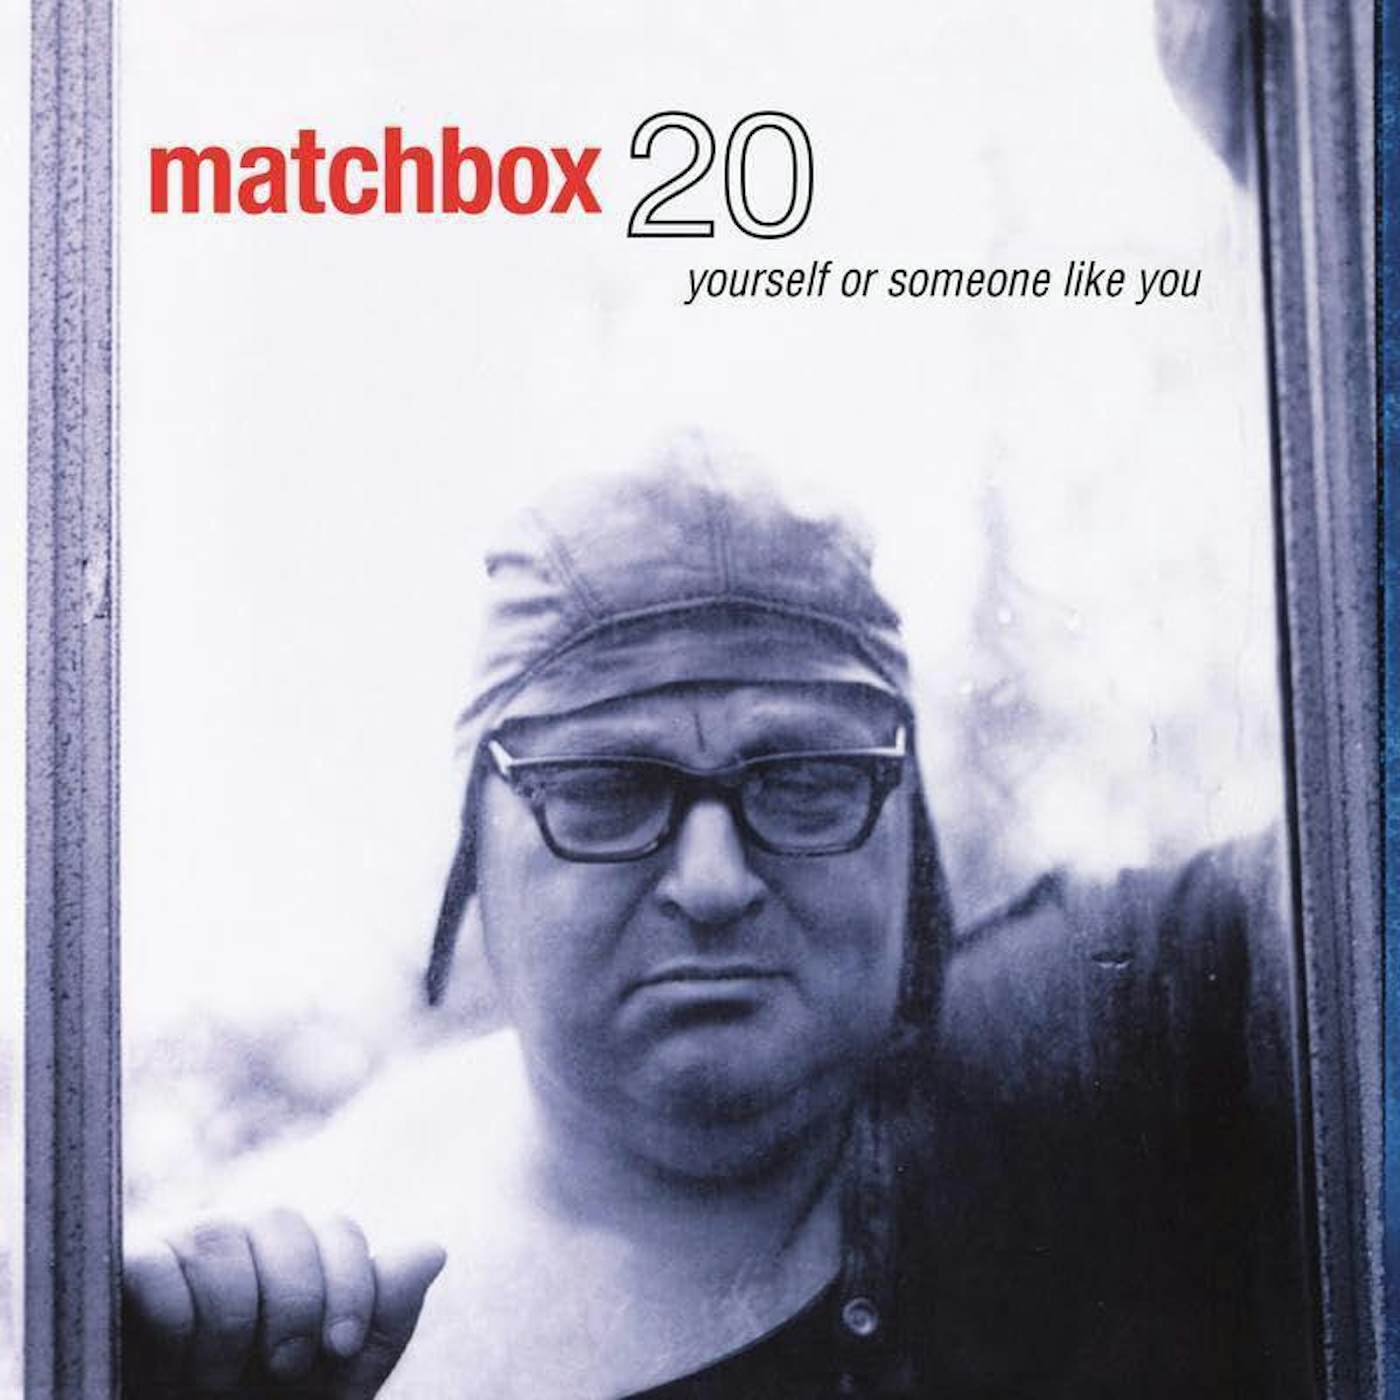 Matchbox 20 YOURSELF OR SOMEONE LIKE YOU (2LP/180G/45RPM) Vinyl Record